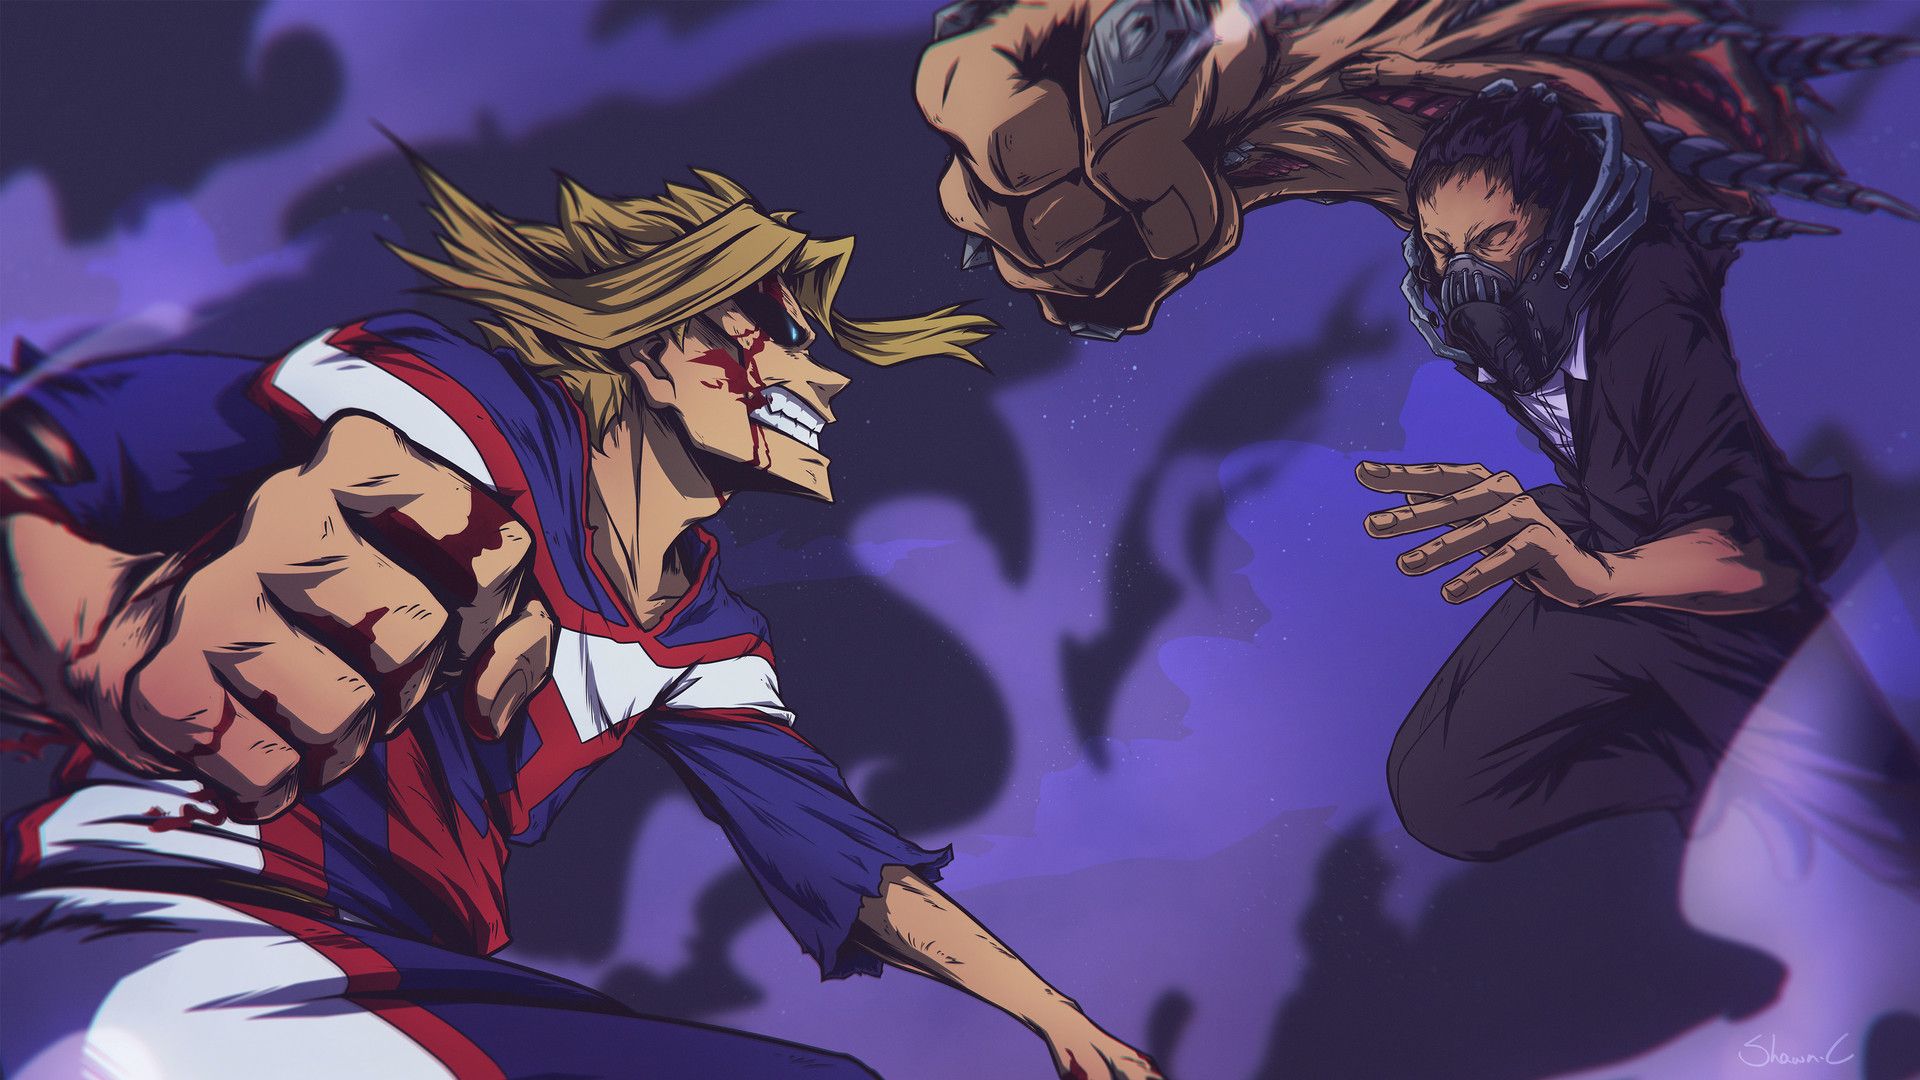 All Might vs All for One